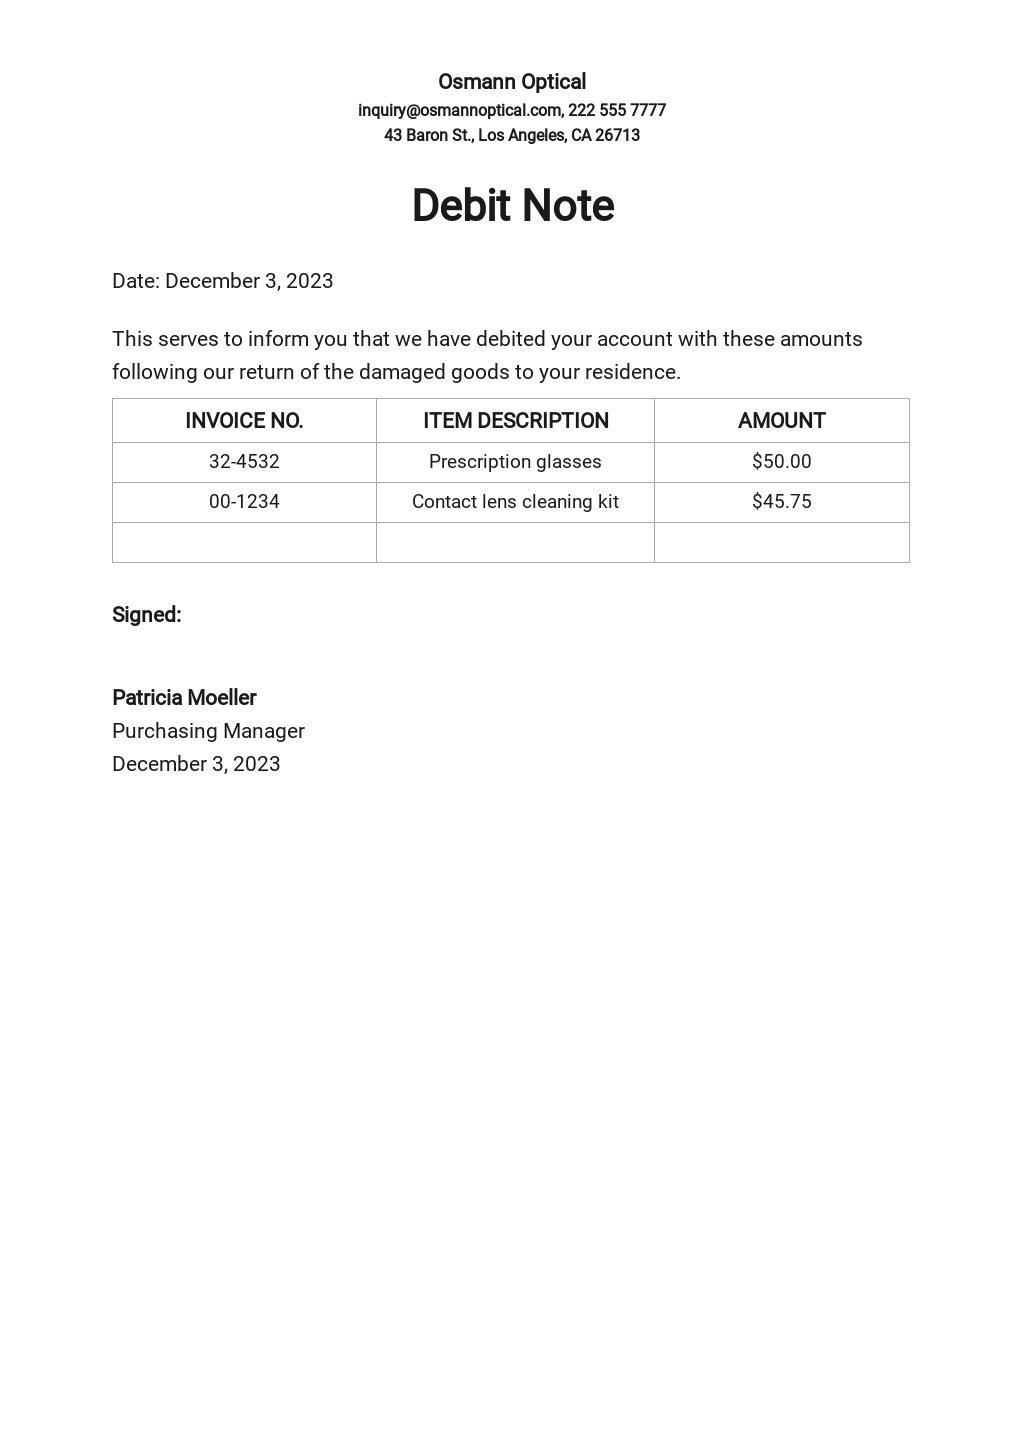 Debit Note Format Template - Word, Apple Pages, PDF  Template.net Throughout Credit Note Template Doc